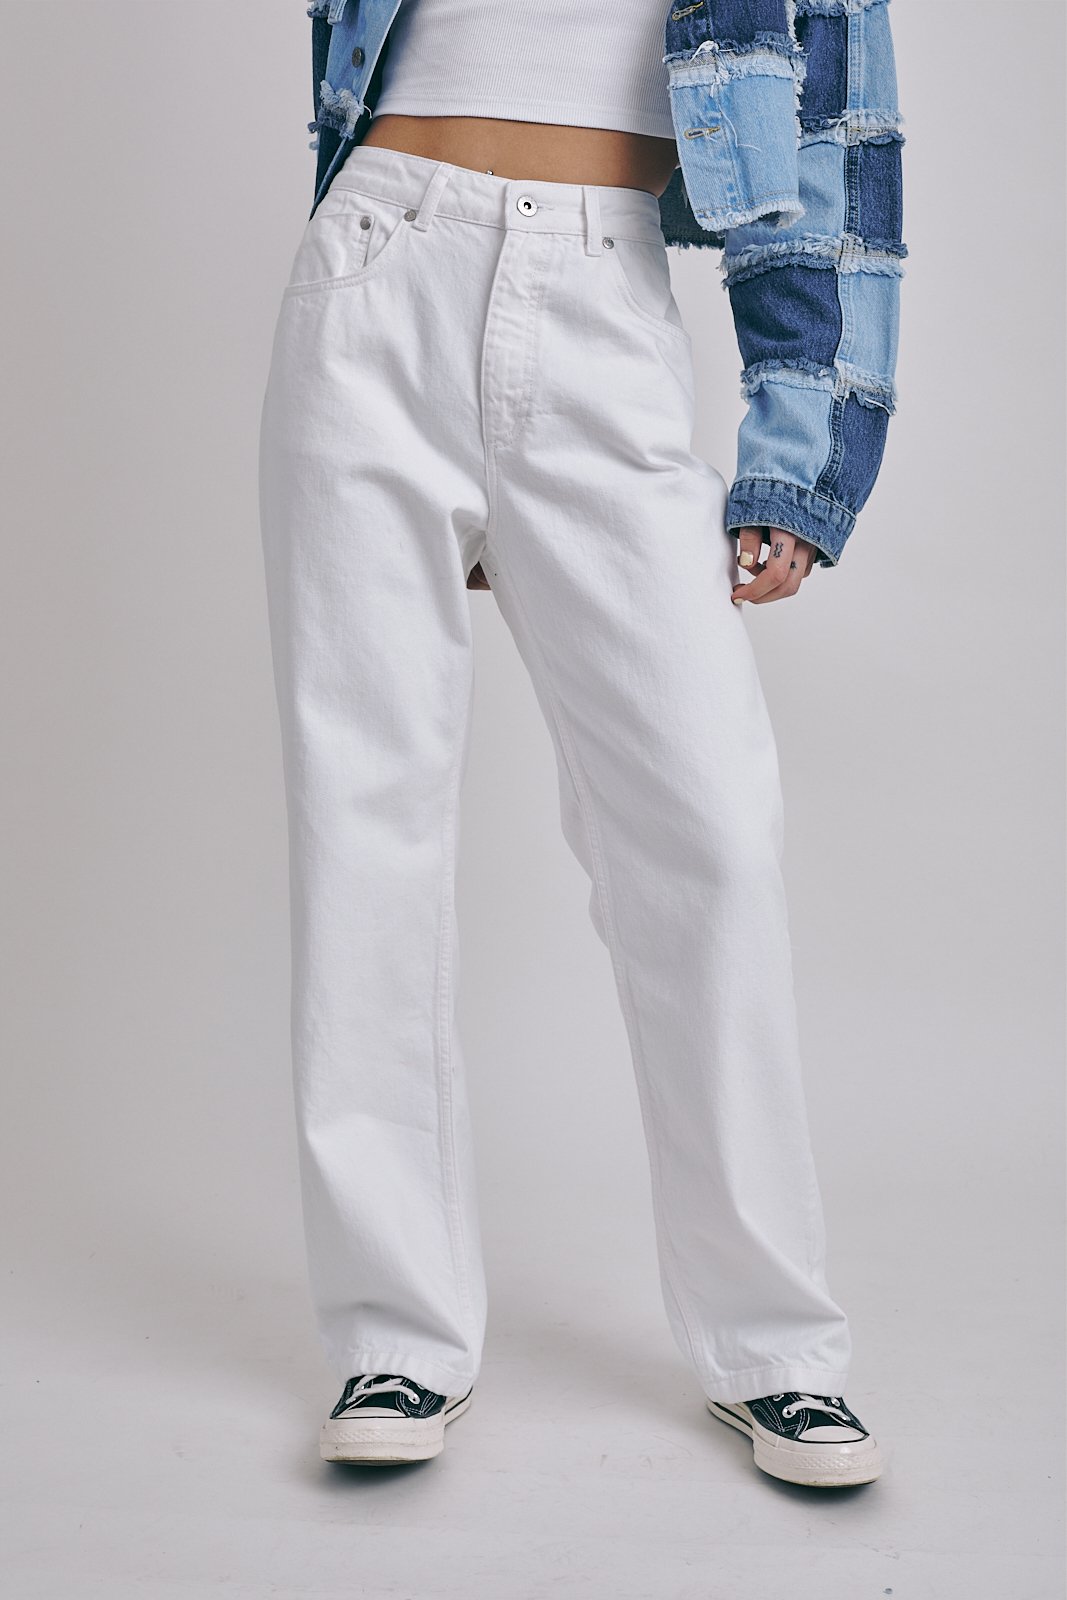 DAD DENIM - WHITE - EXCLUSIVE Denim from THE RAGGED PRIEST - Just €48.95! SHOP NOW AT IAMINHATELOVE BOTH IN STORE FOR CYPRUS AND ONLINE WORLDWIDE @ IAMINHATELOVE.COM